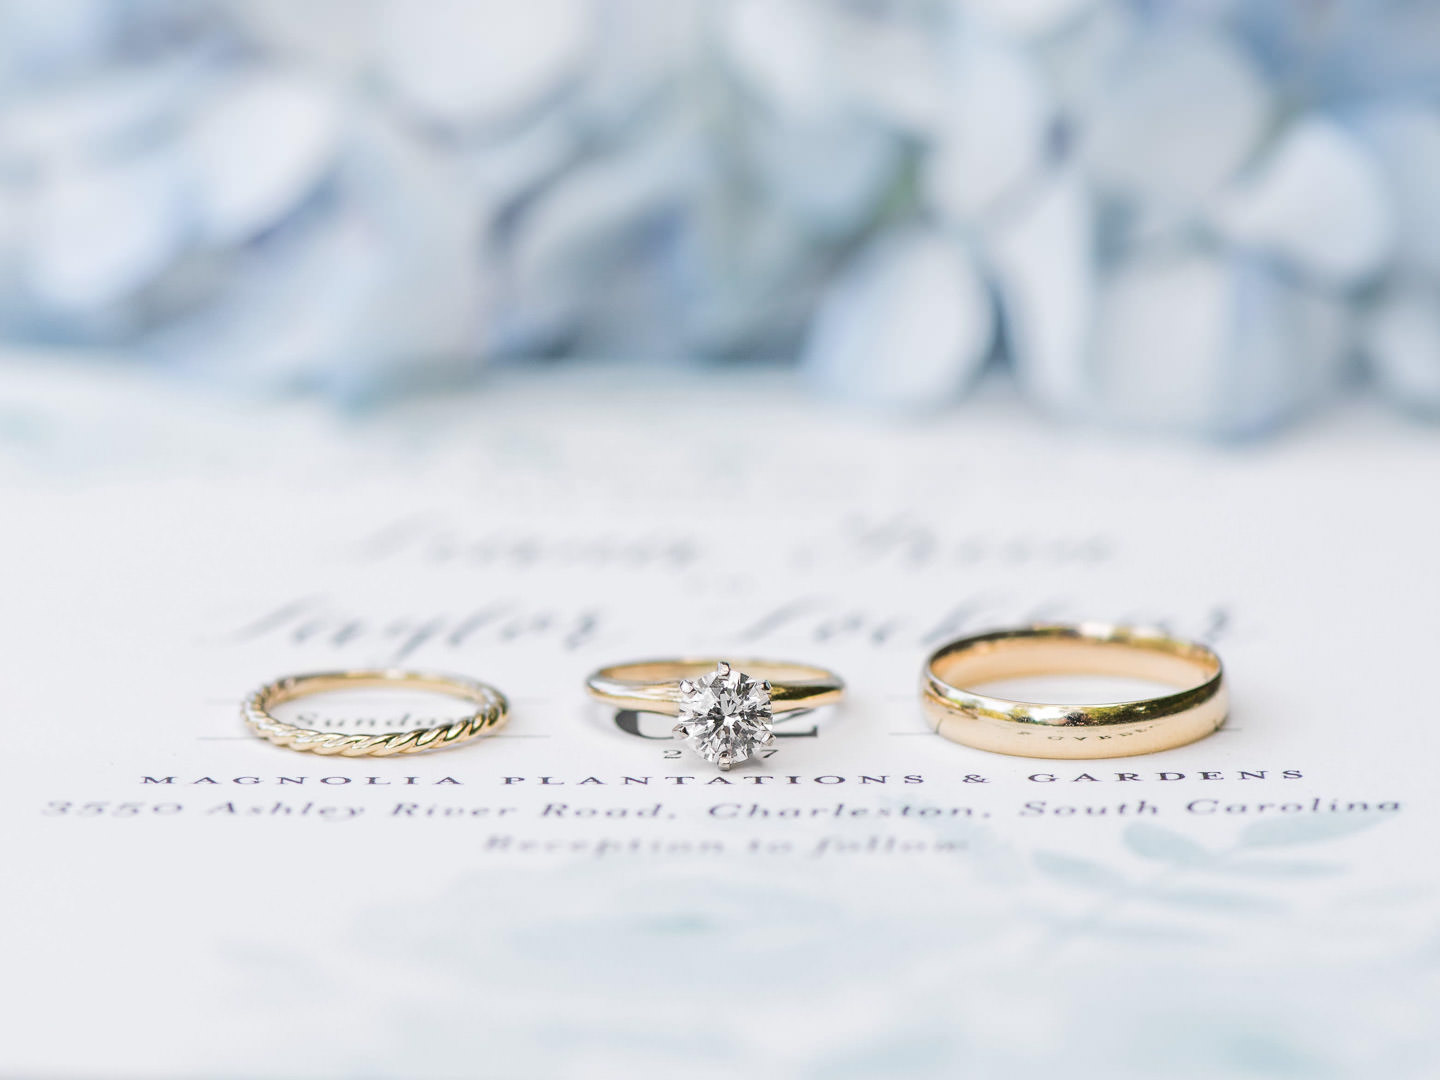 Gold wedding band, gold engagement ring with solitaire, and gold grooms band on invitation suite and hydrangeas